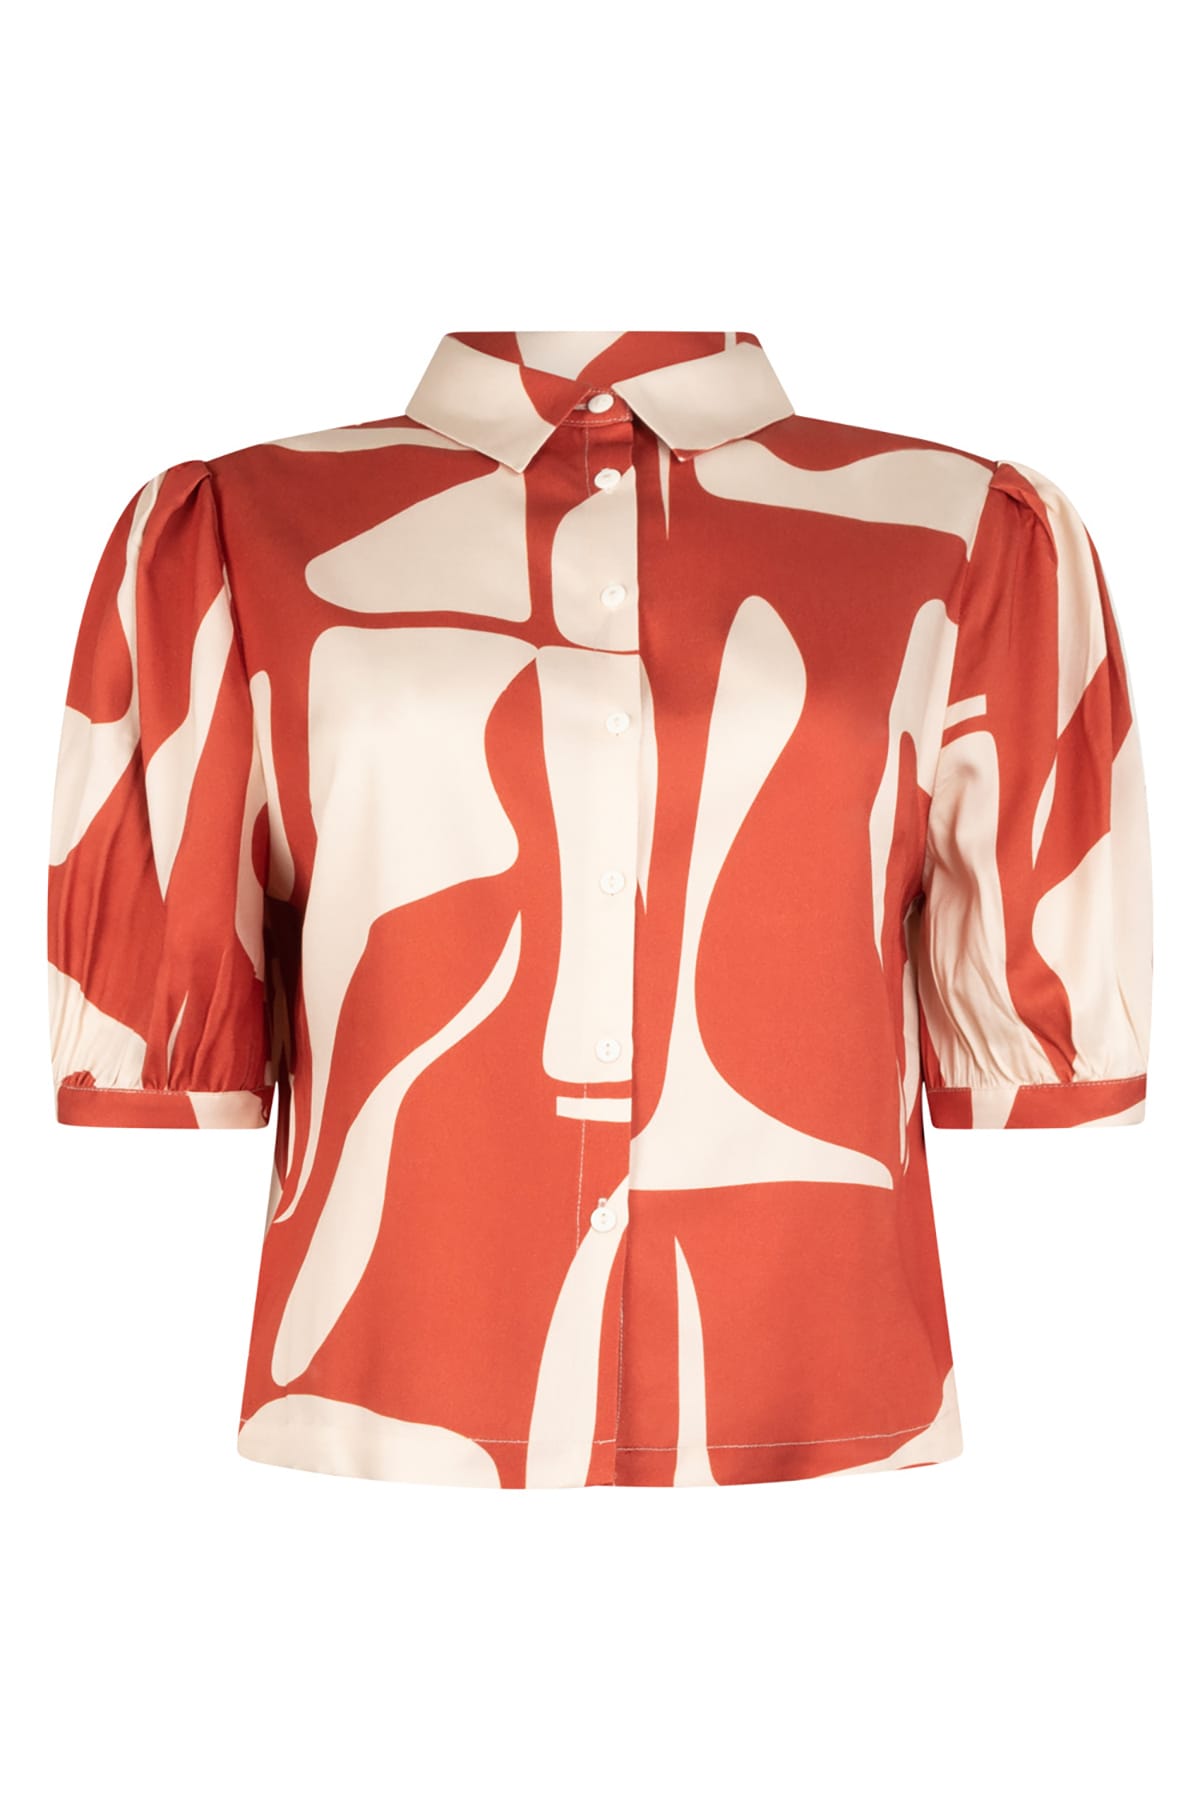 Bluse Lierre shirt s/s Graphic ginger Bluse Another Label 